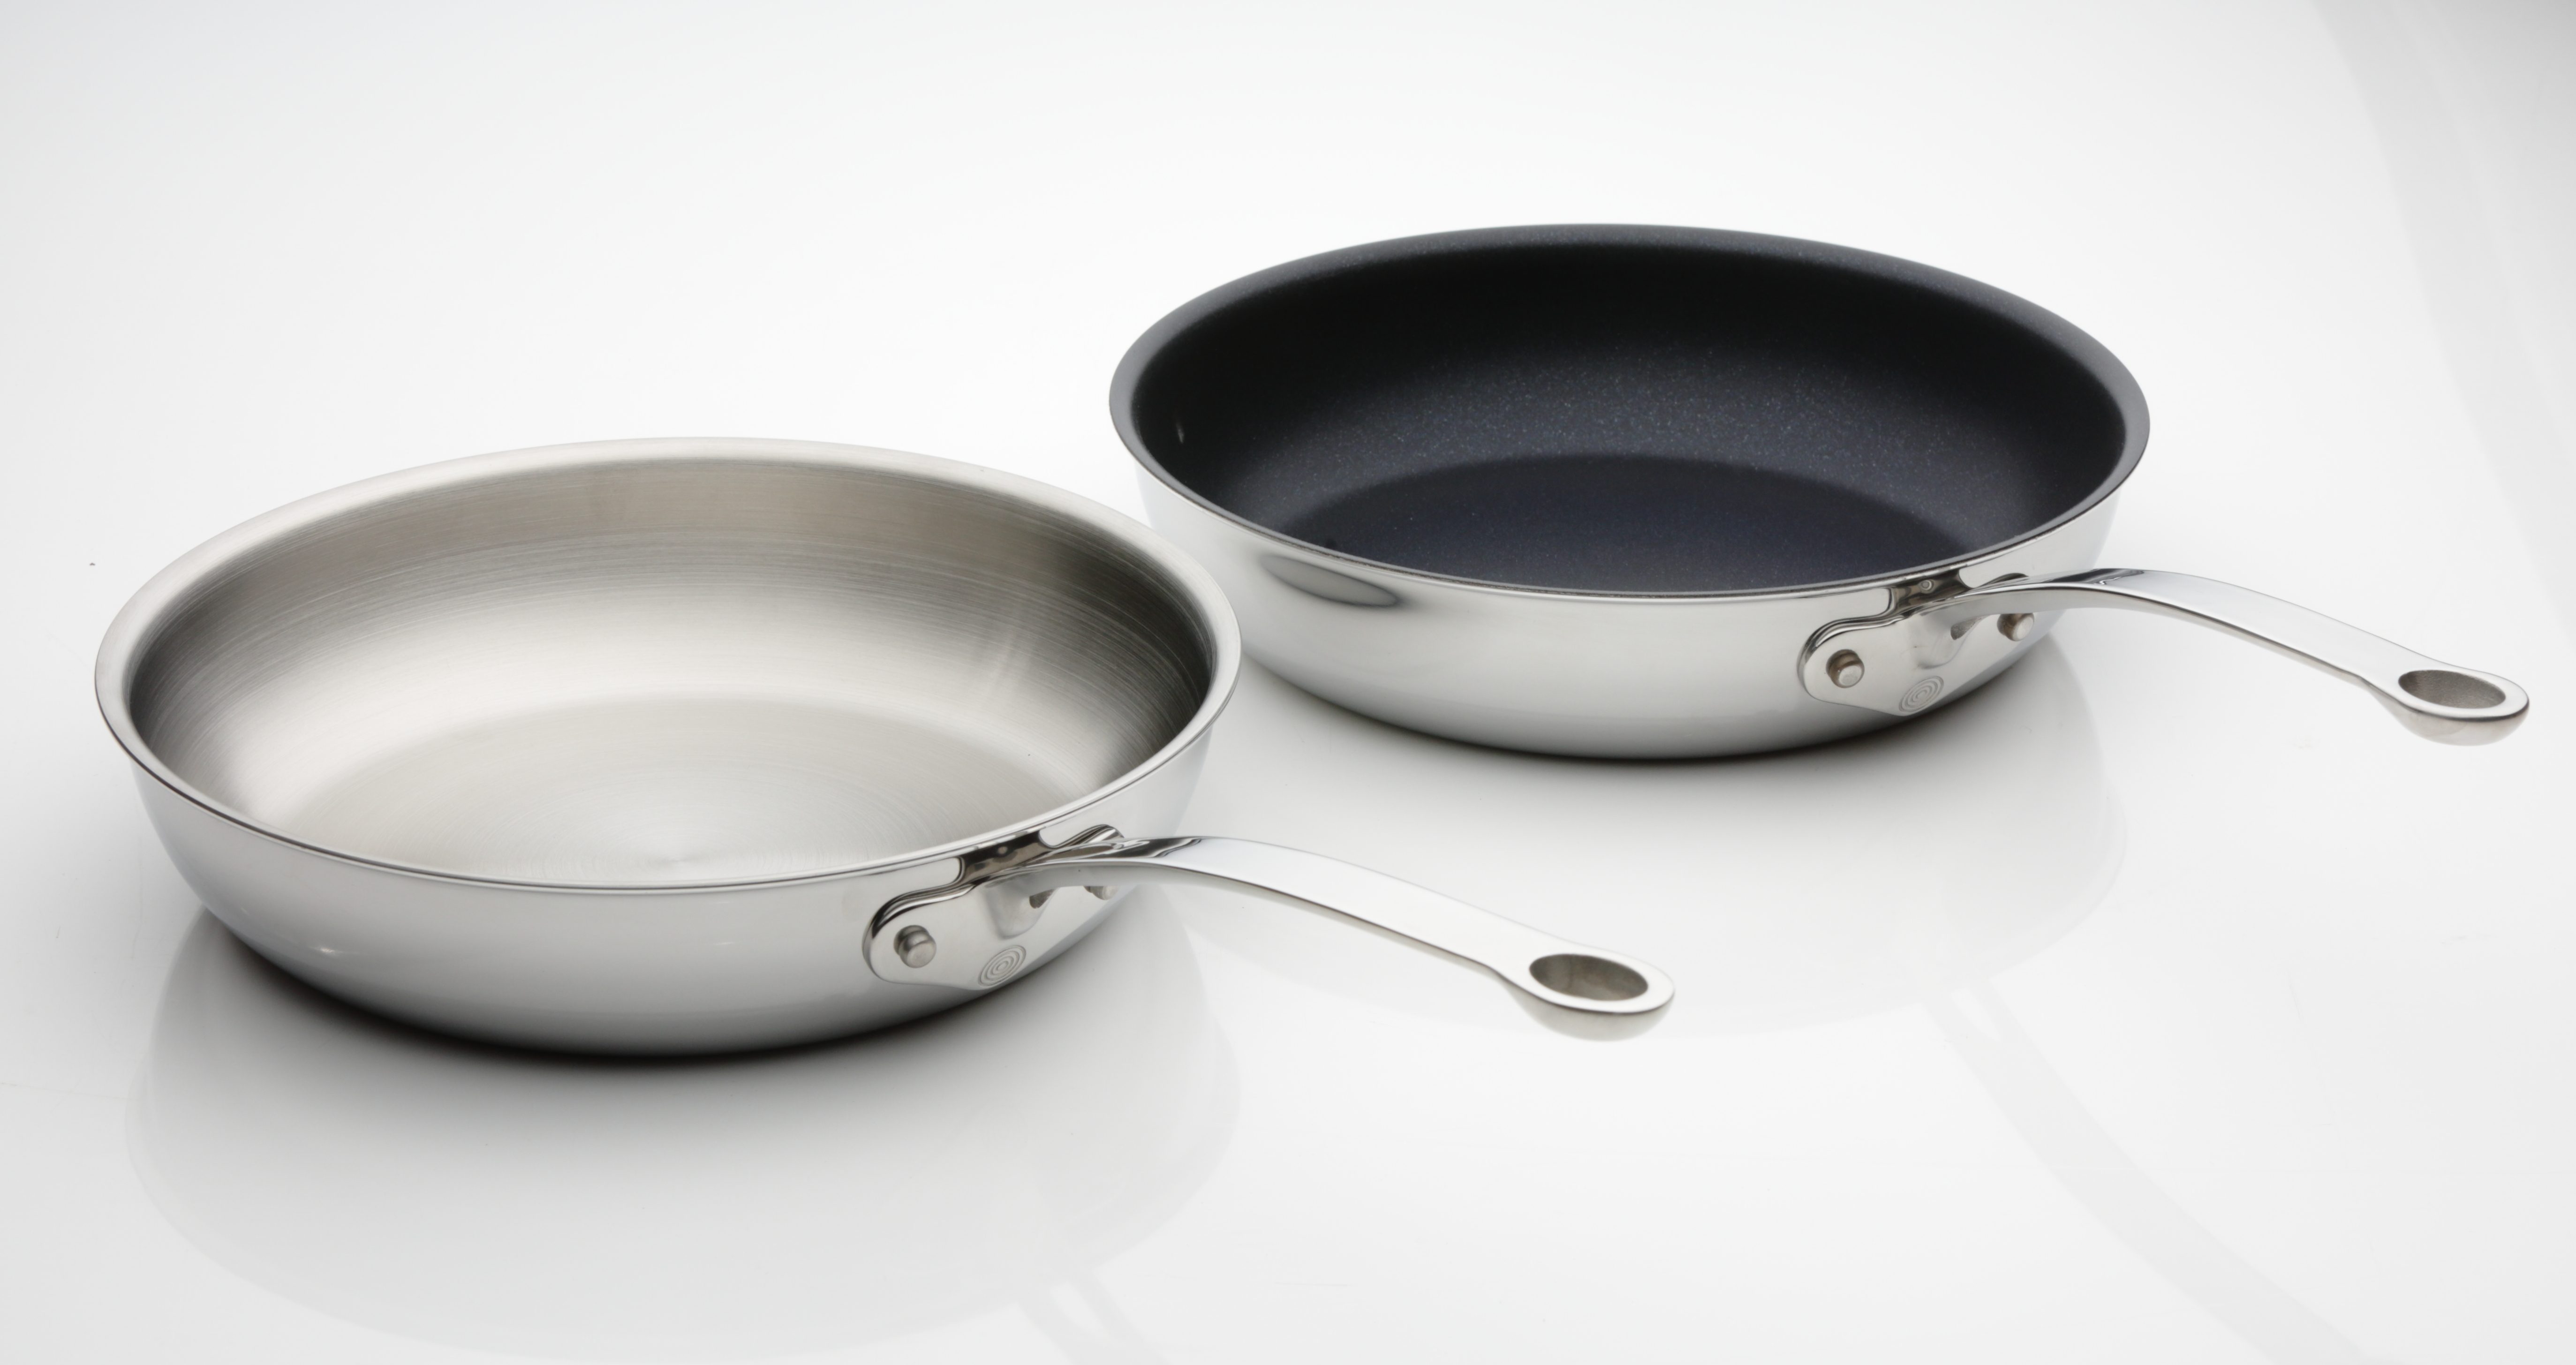 ProWare Stainless Steel Tri-Ply Frying Pans Non-Stick